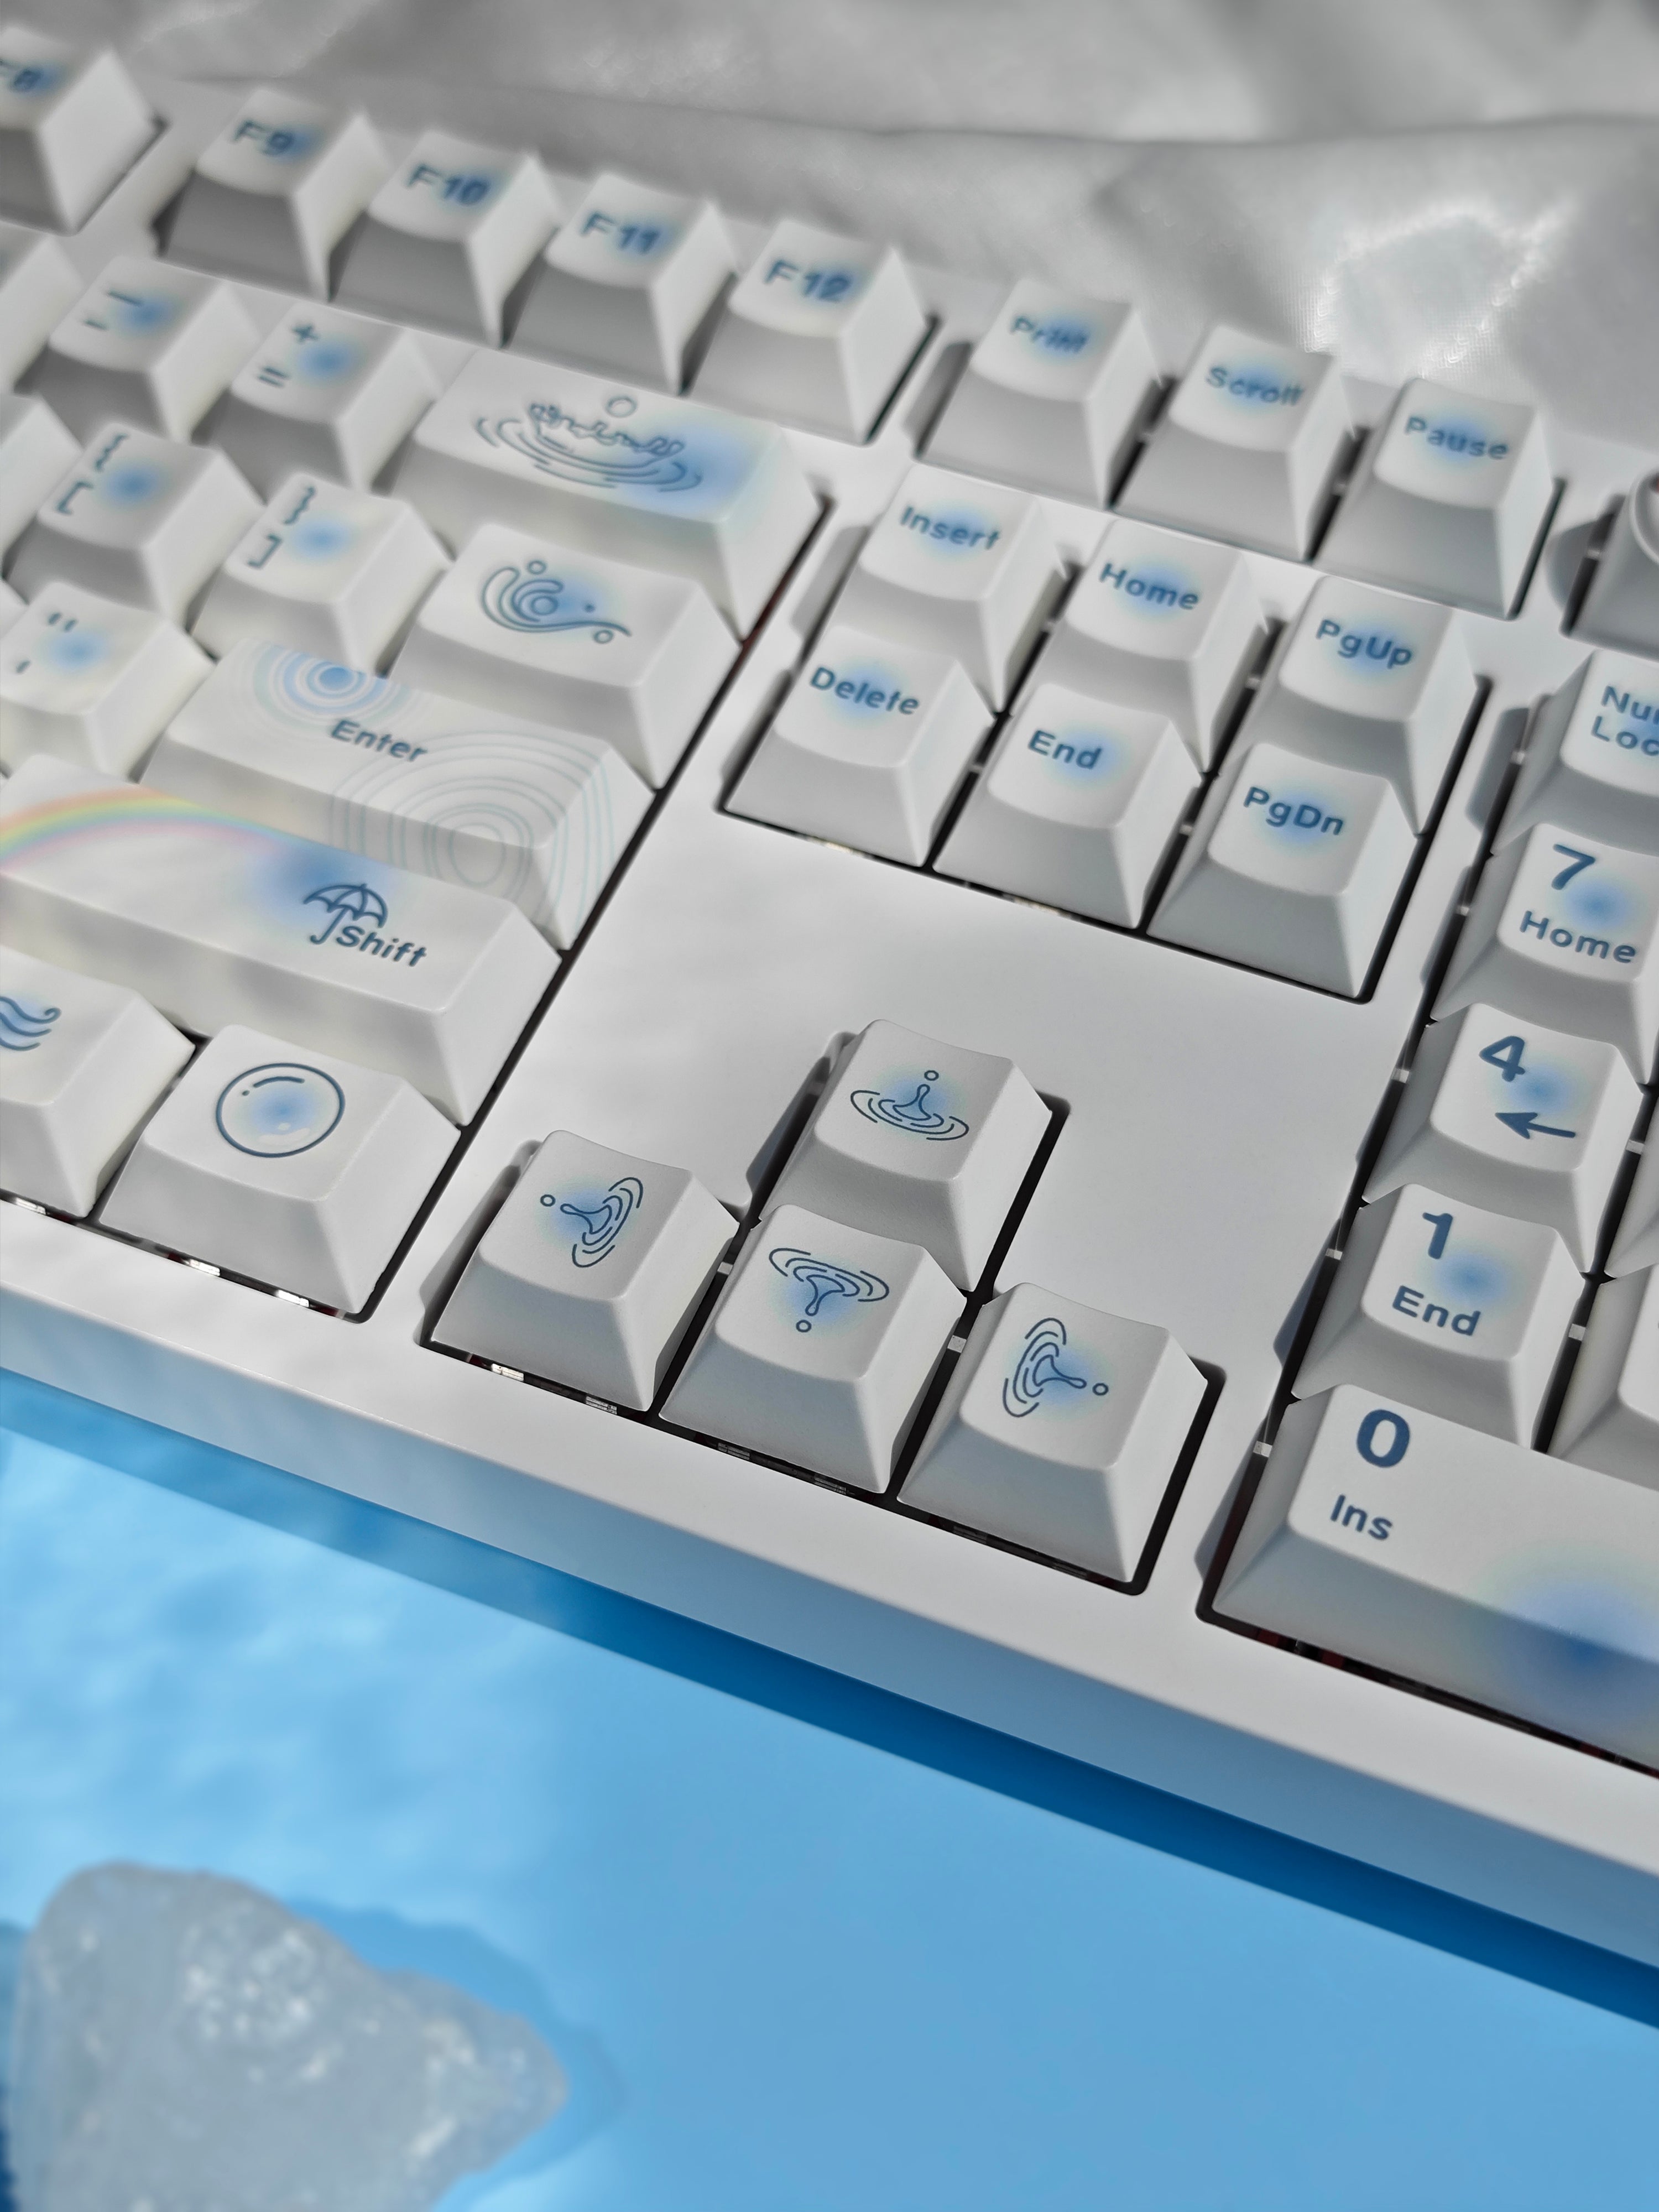 Personalized keycaps: add a unique charm to your keyboard